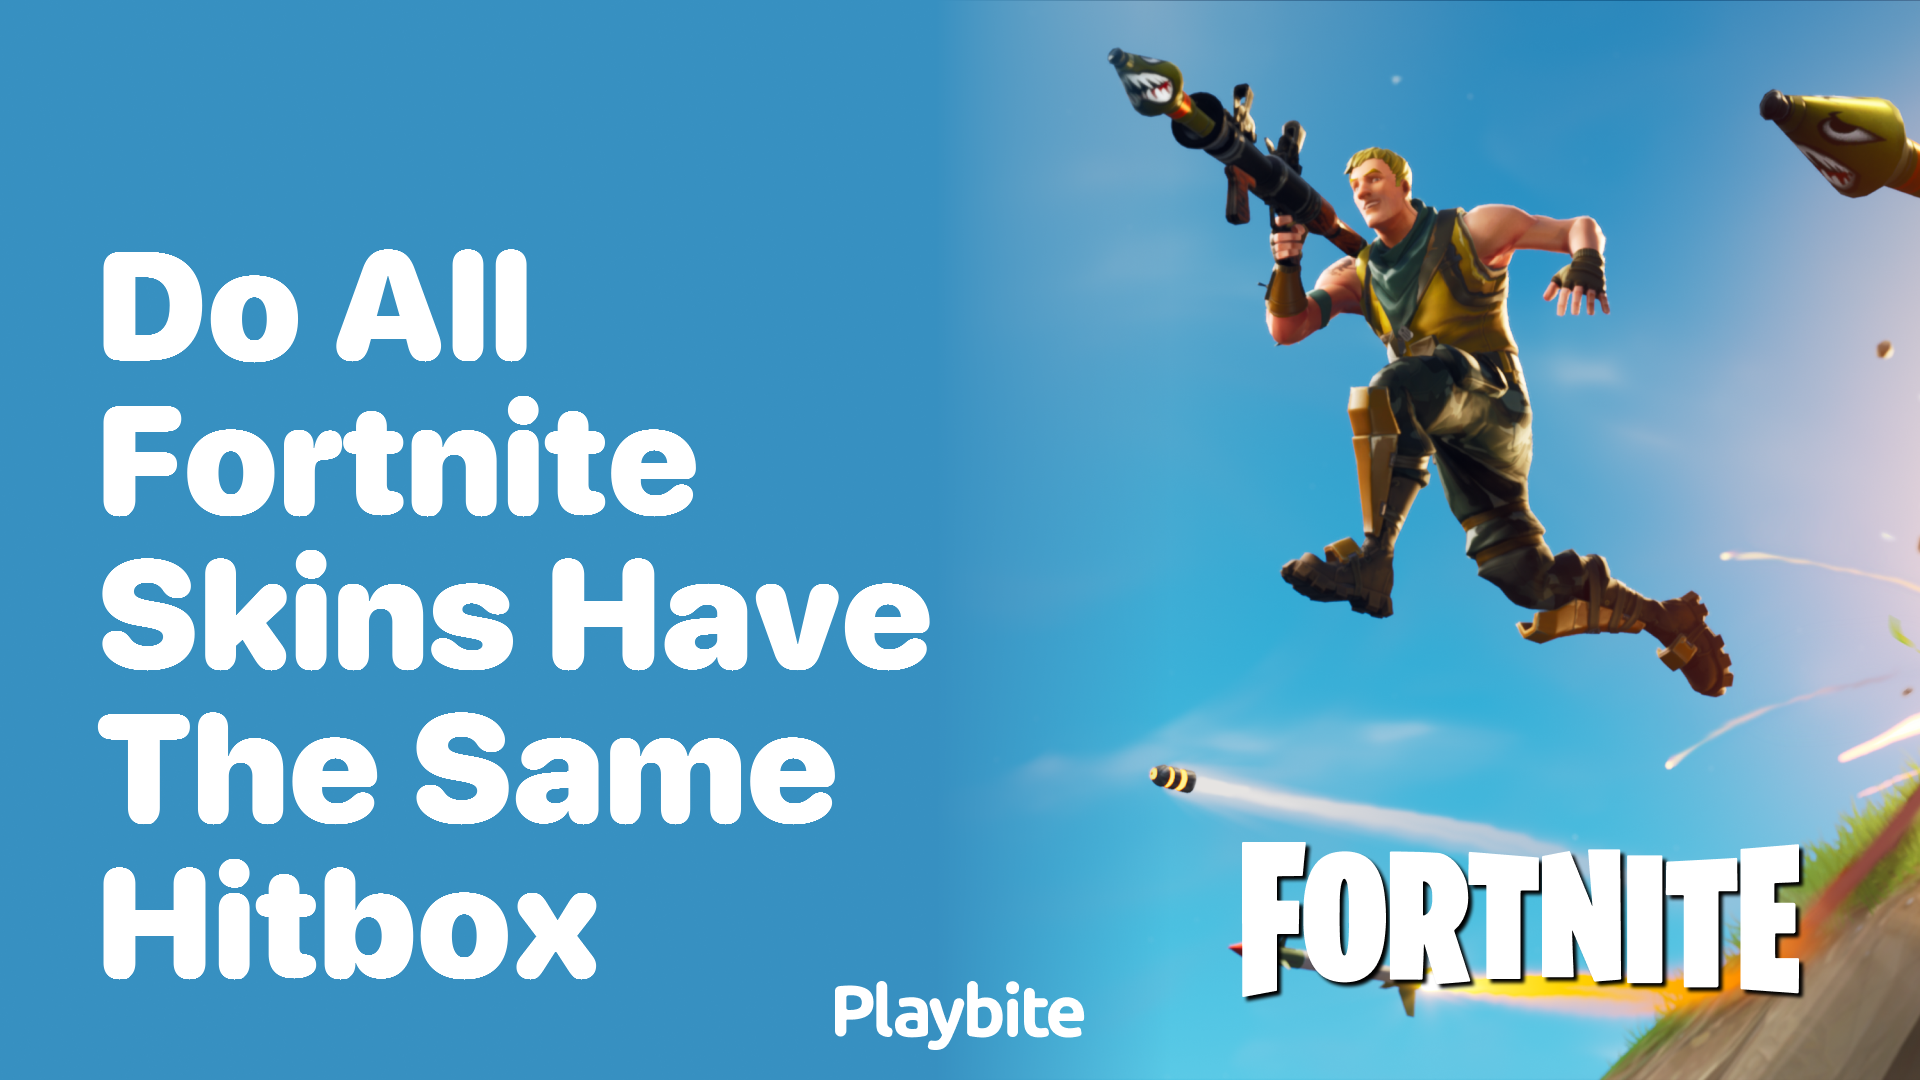 Do All Fortnite Skins Have the Same Hitbox? Let&#8217;s Find Out!